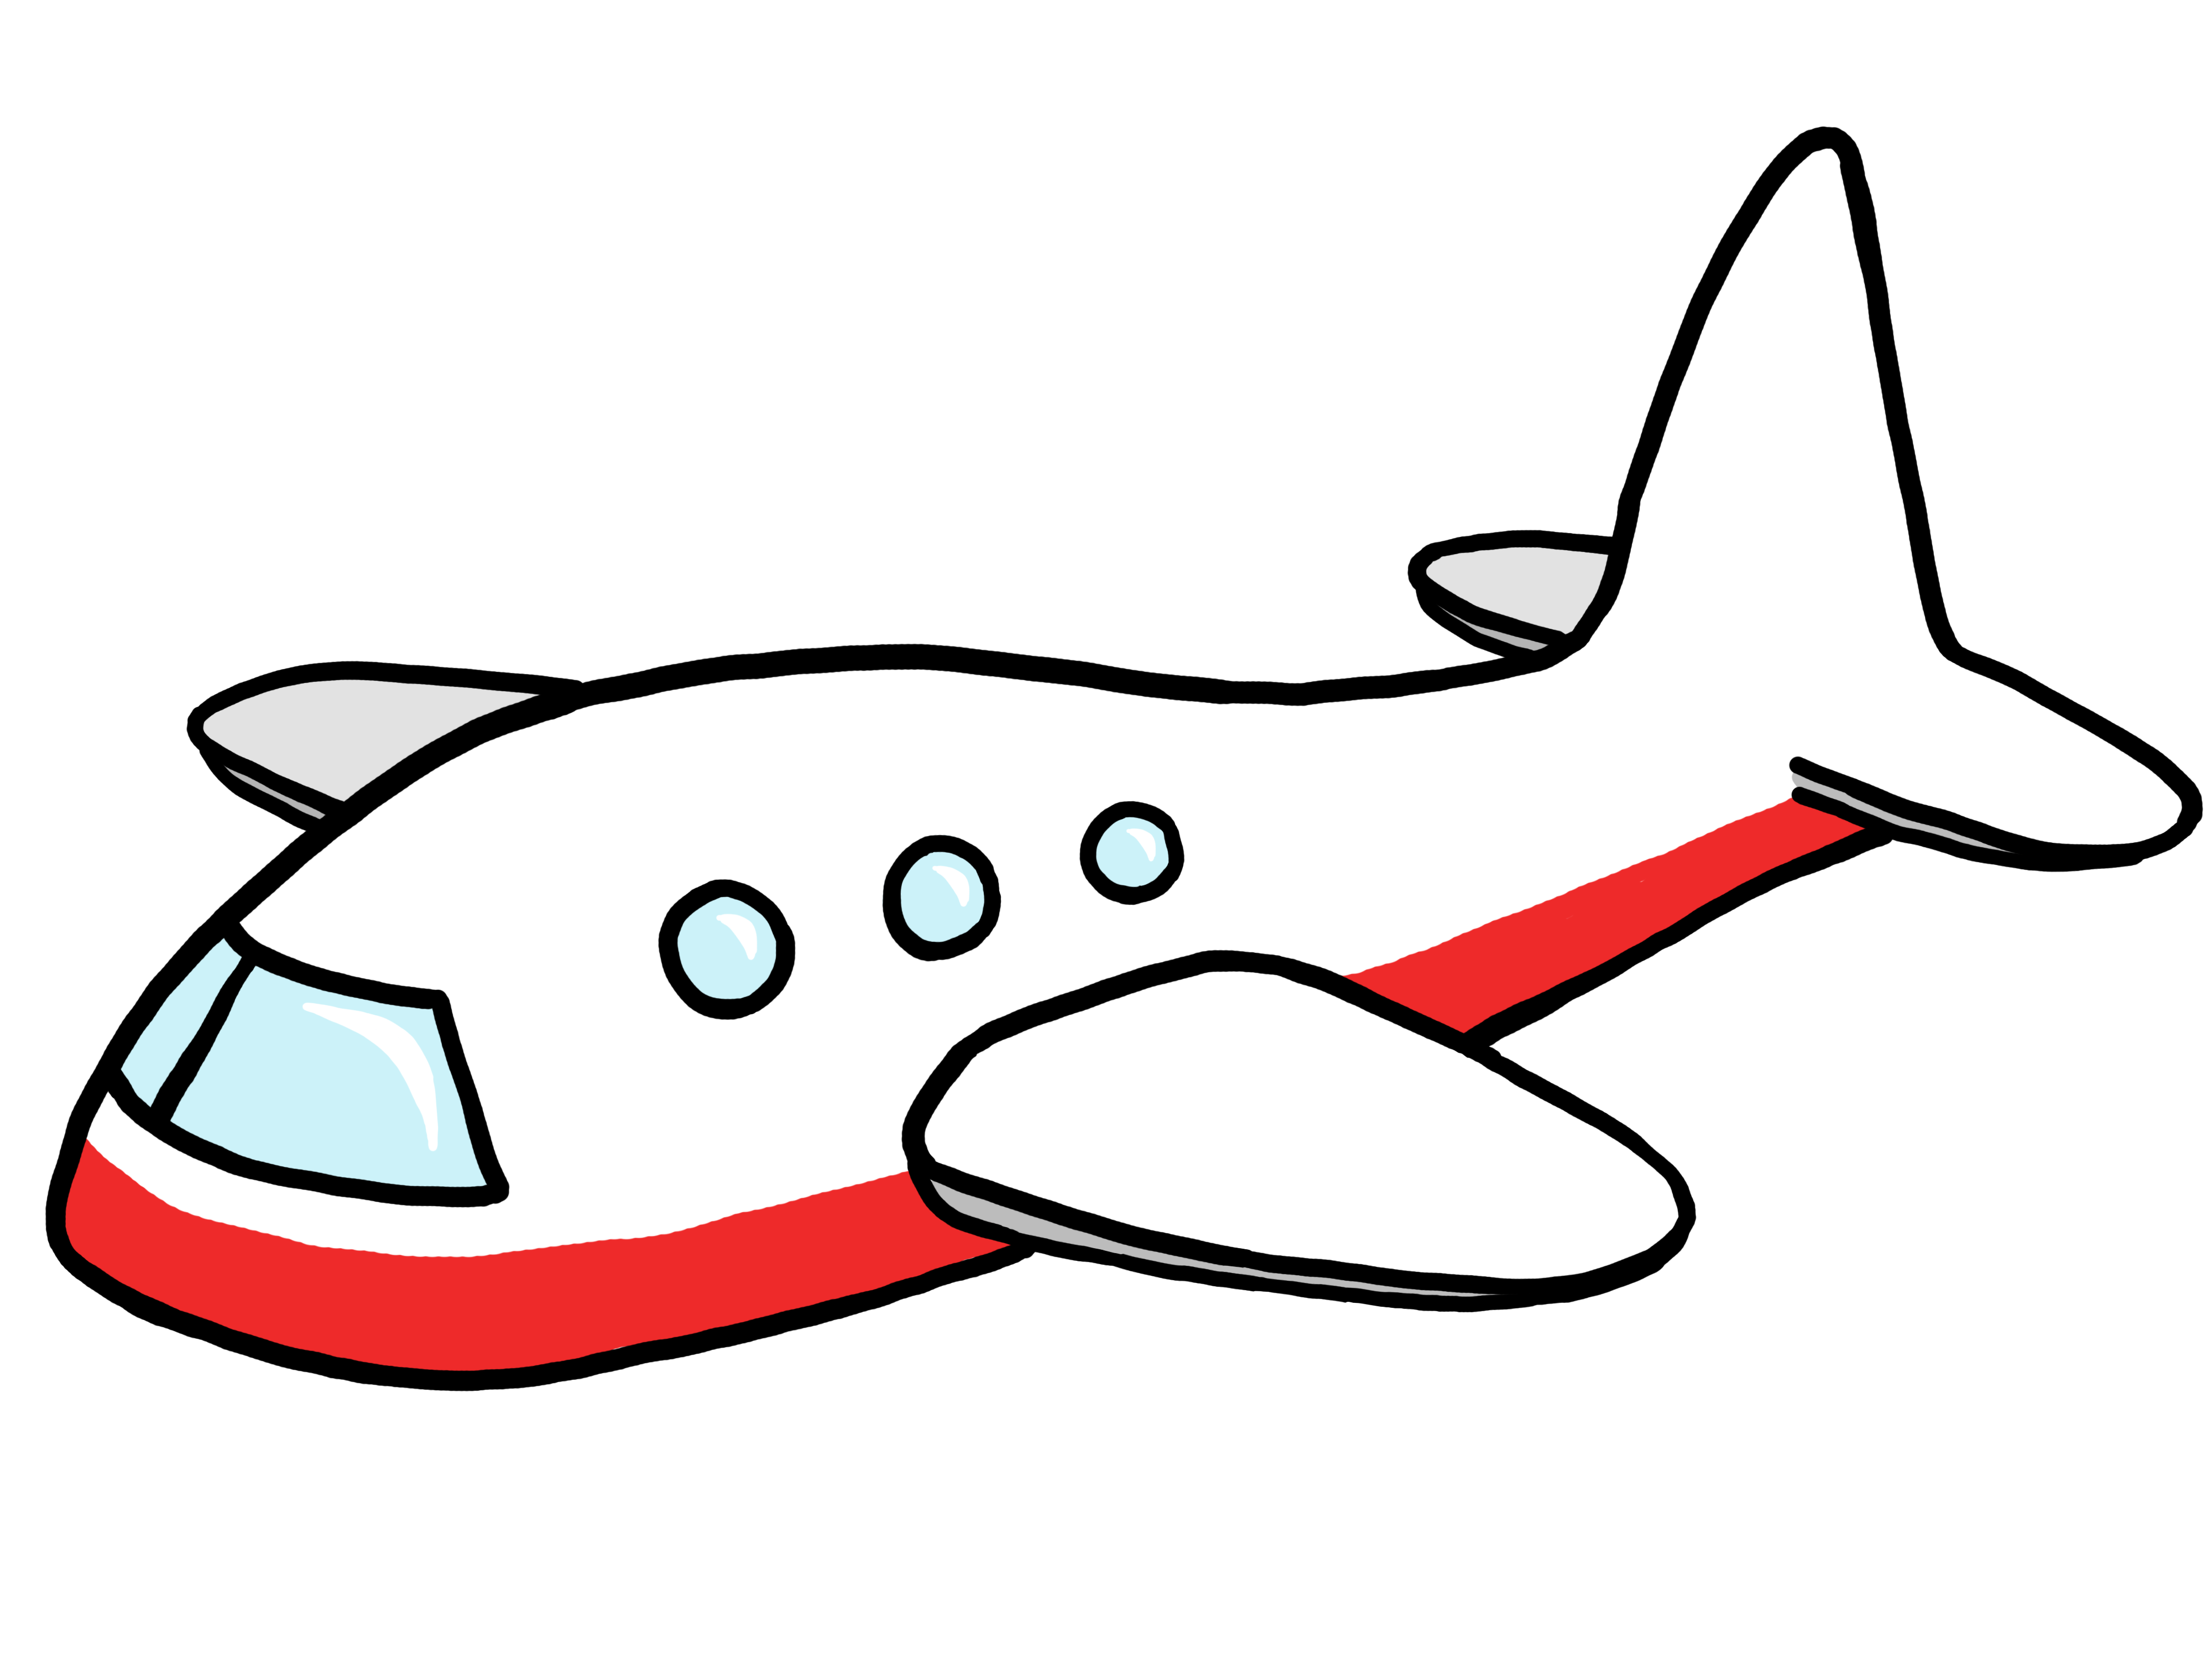 Airplane Clip Art - Creative and Versatile Graphics for Aviation ...